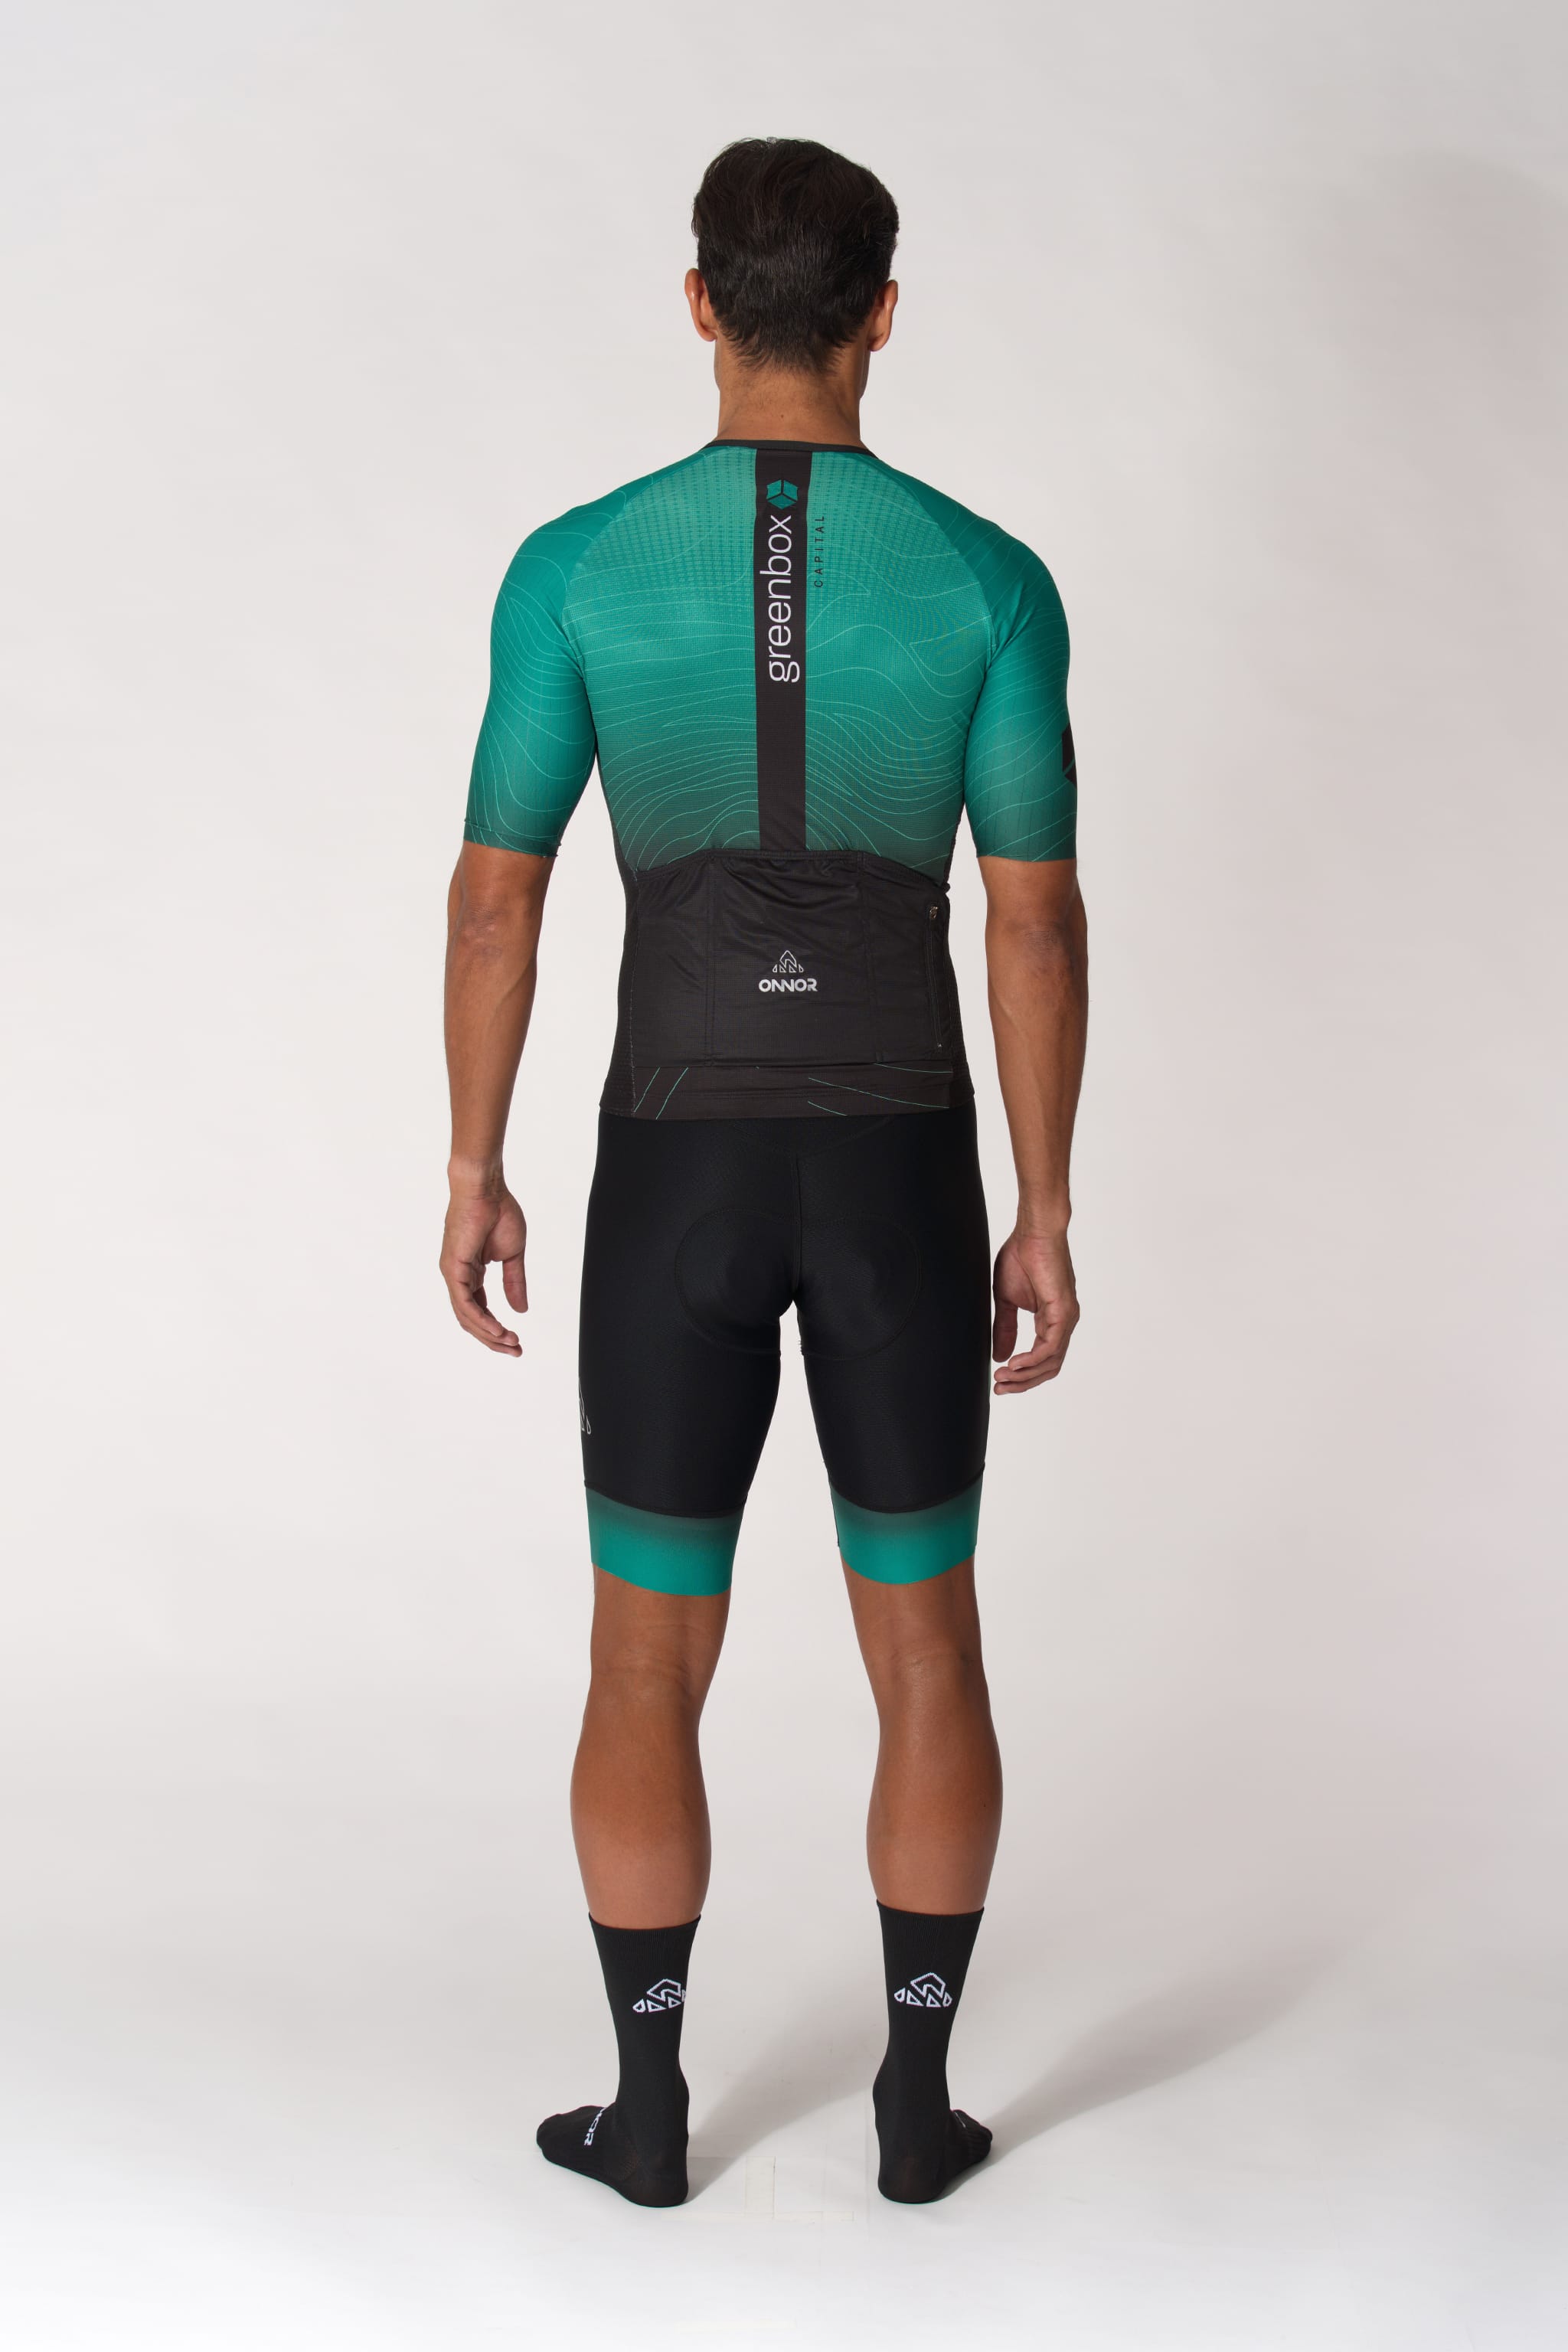 Design-Your-Own Cycling Jersey No Minimum